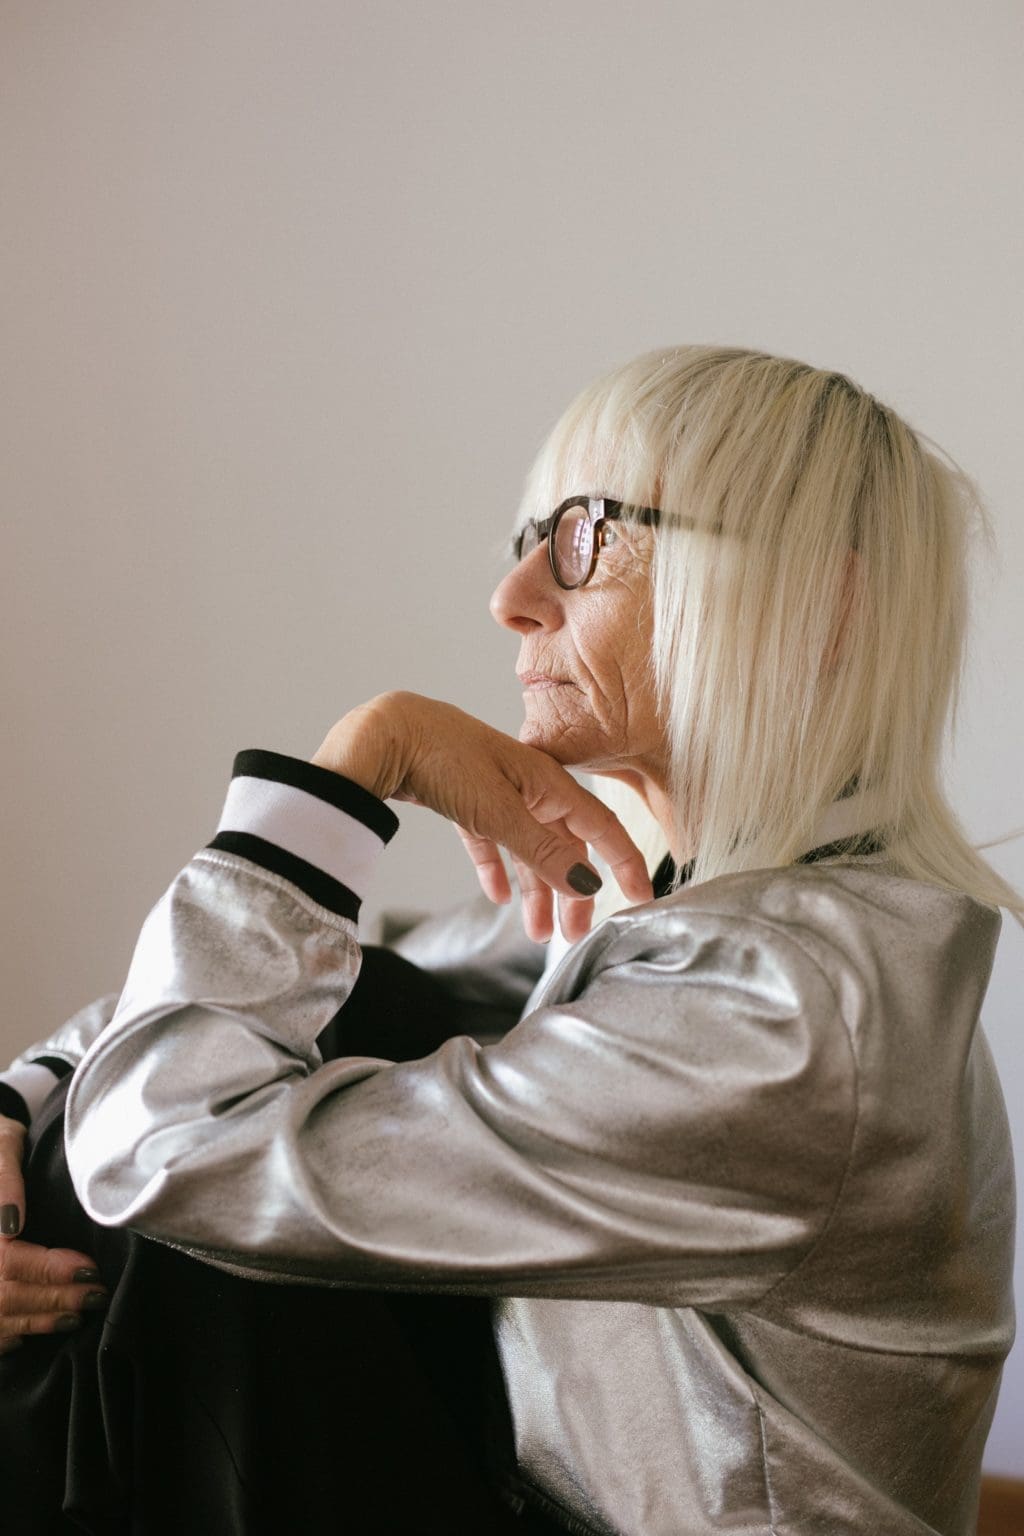 Older Blond Woman with glasses